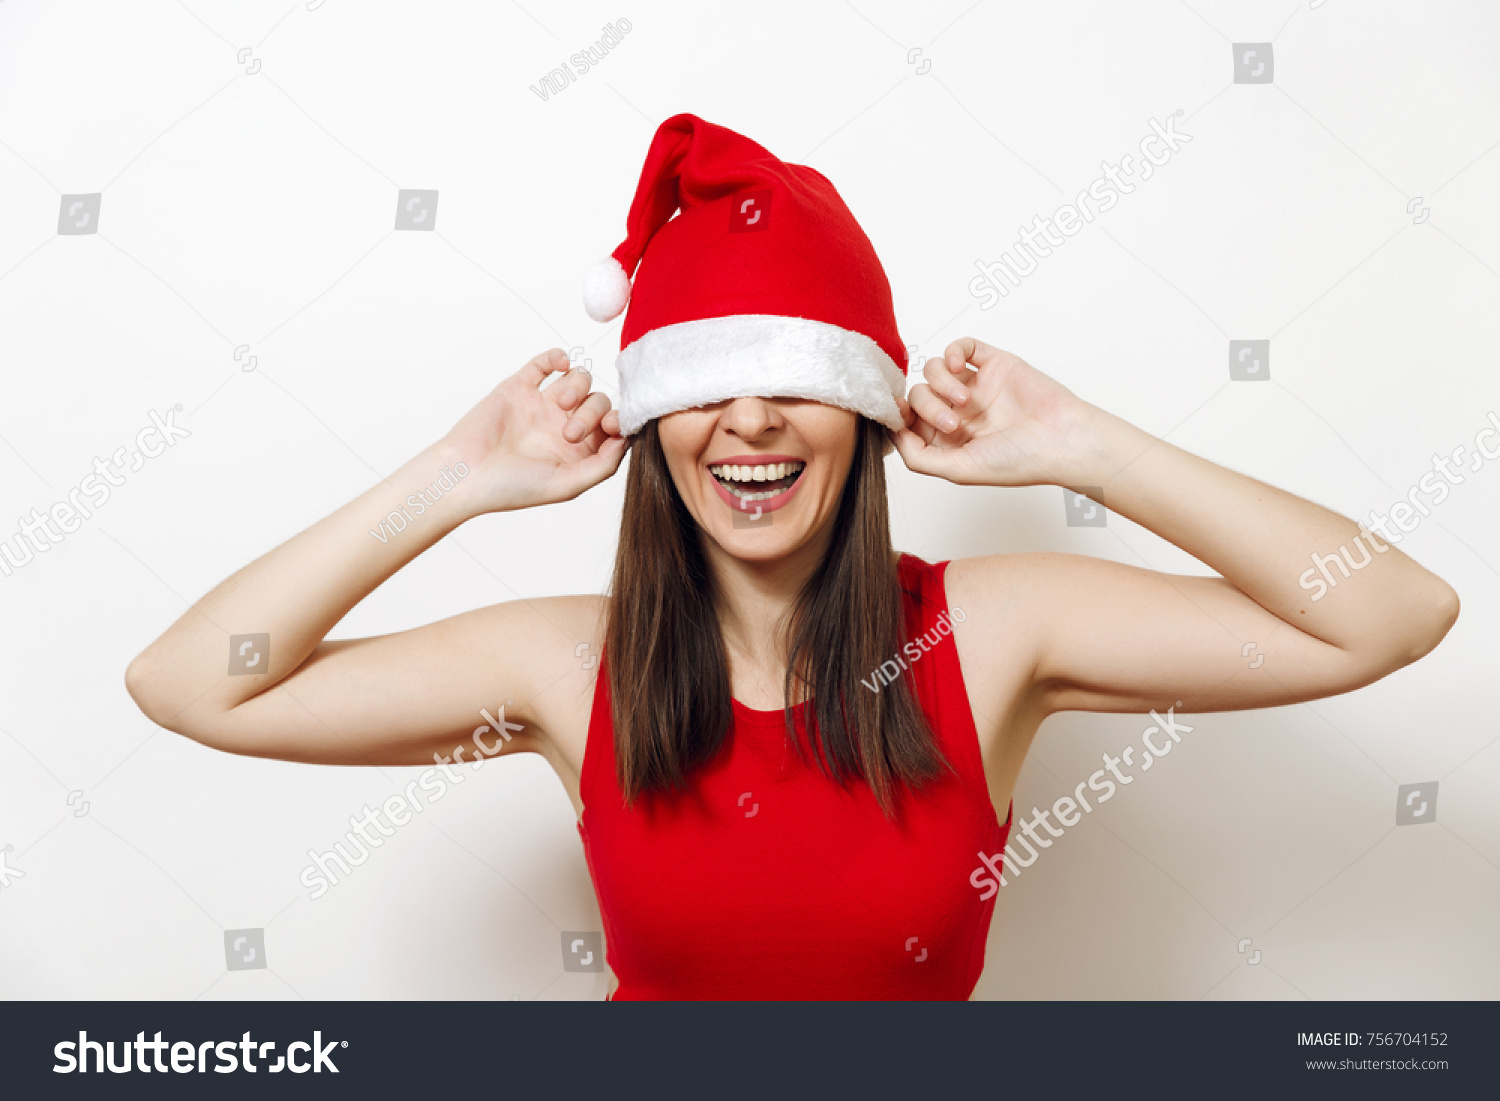 Pretty caucasian young happy woman with healthy skin and charming smile wearing red dress and Christmas hat covering her eyes on white background. Santa girl isolated. New Year holiday 2018 concept #756704152